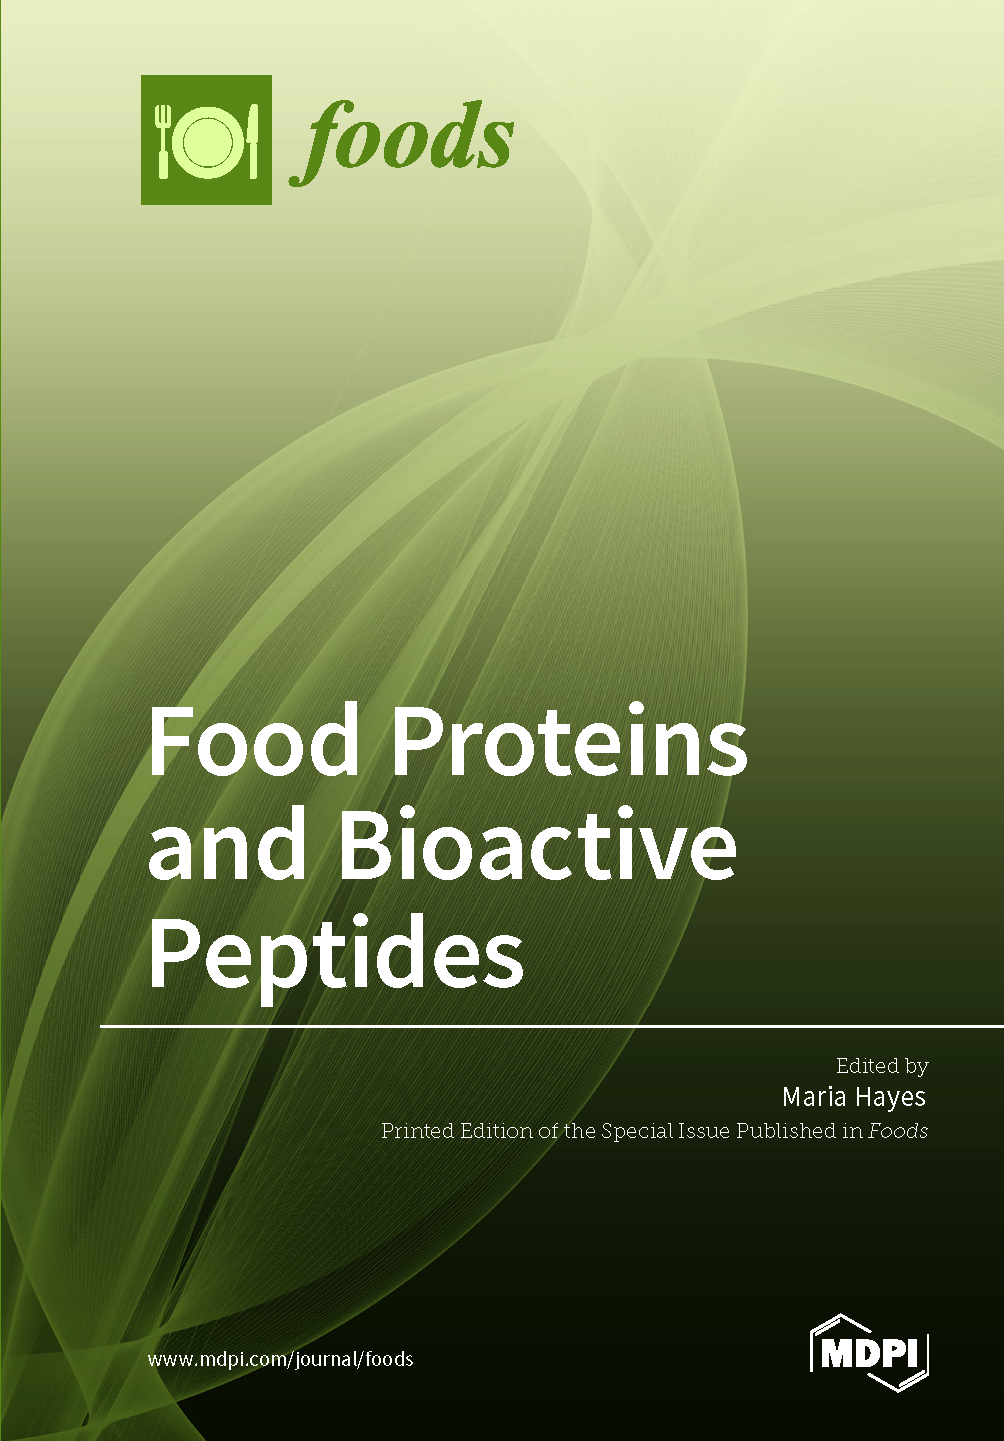 Food Proteins and Bioactive Peptides